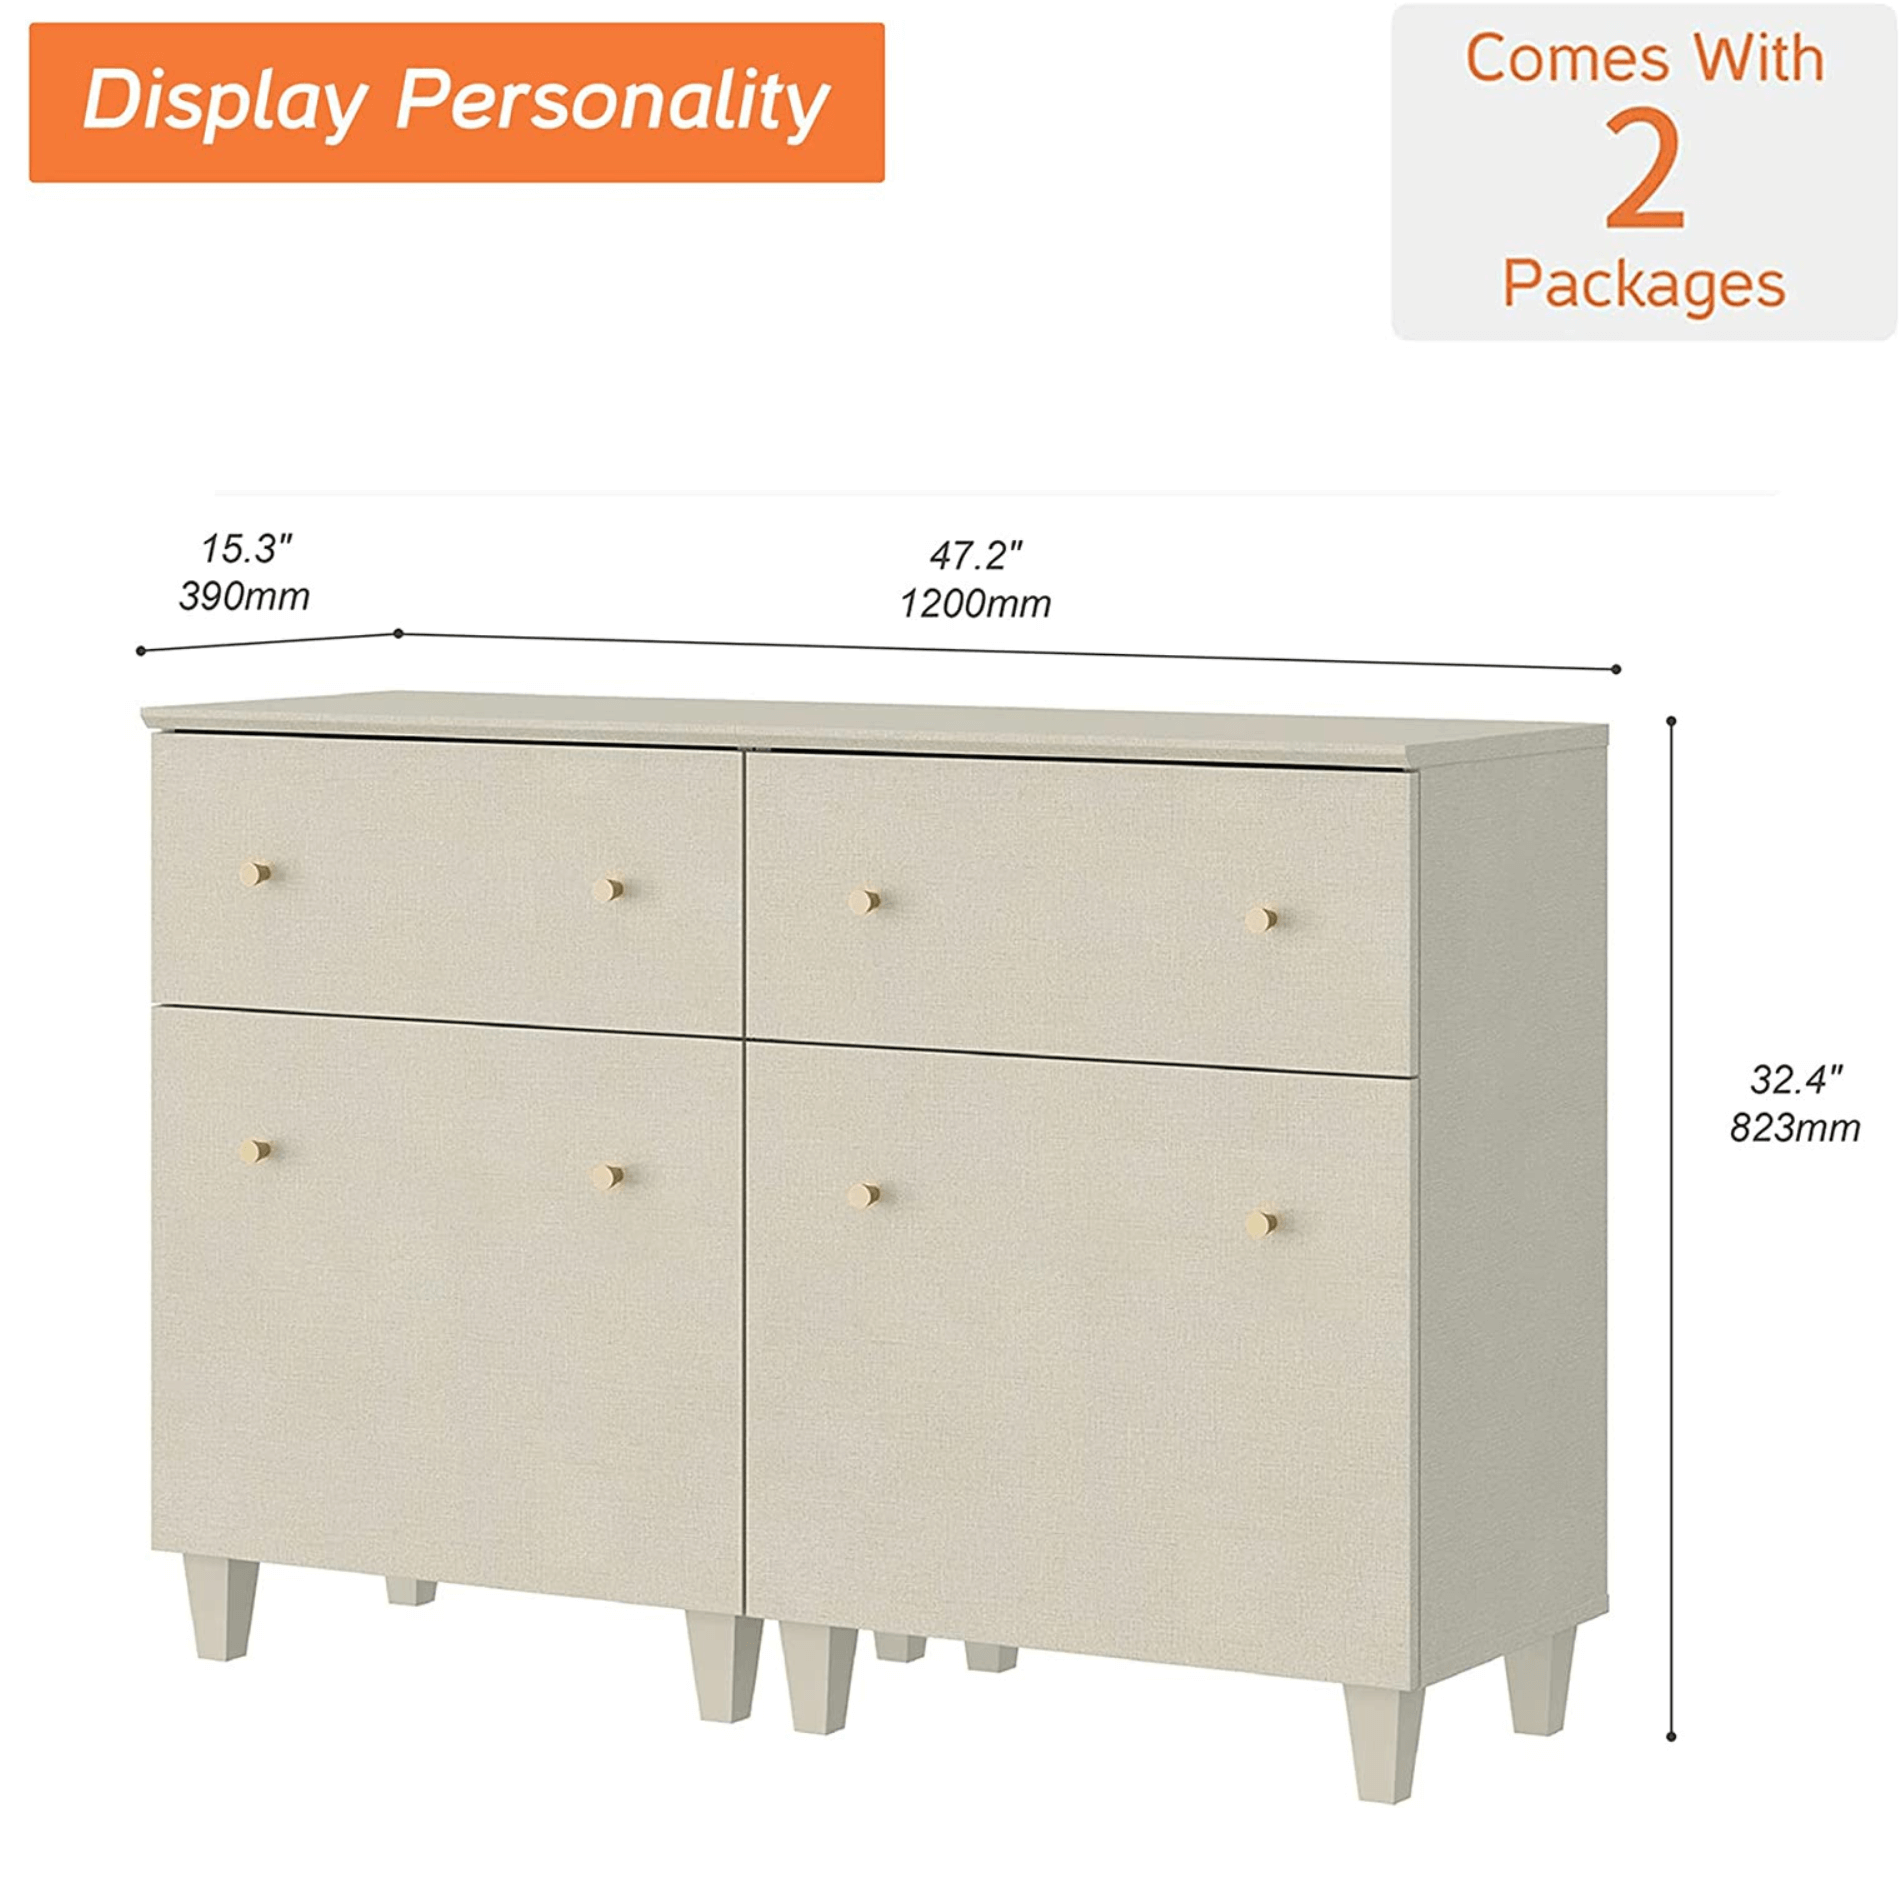 WAMPAT Set of 2 Storage Cabinet for Living Room, 2-in-1 Living Room Beige Wood Side Cabinets, Beige Fabric Texture Finish